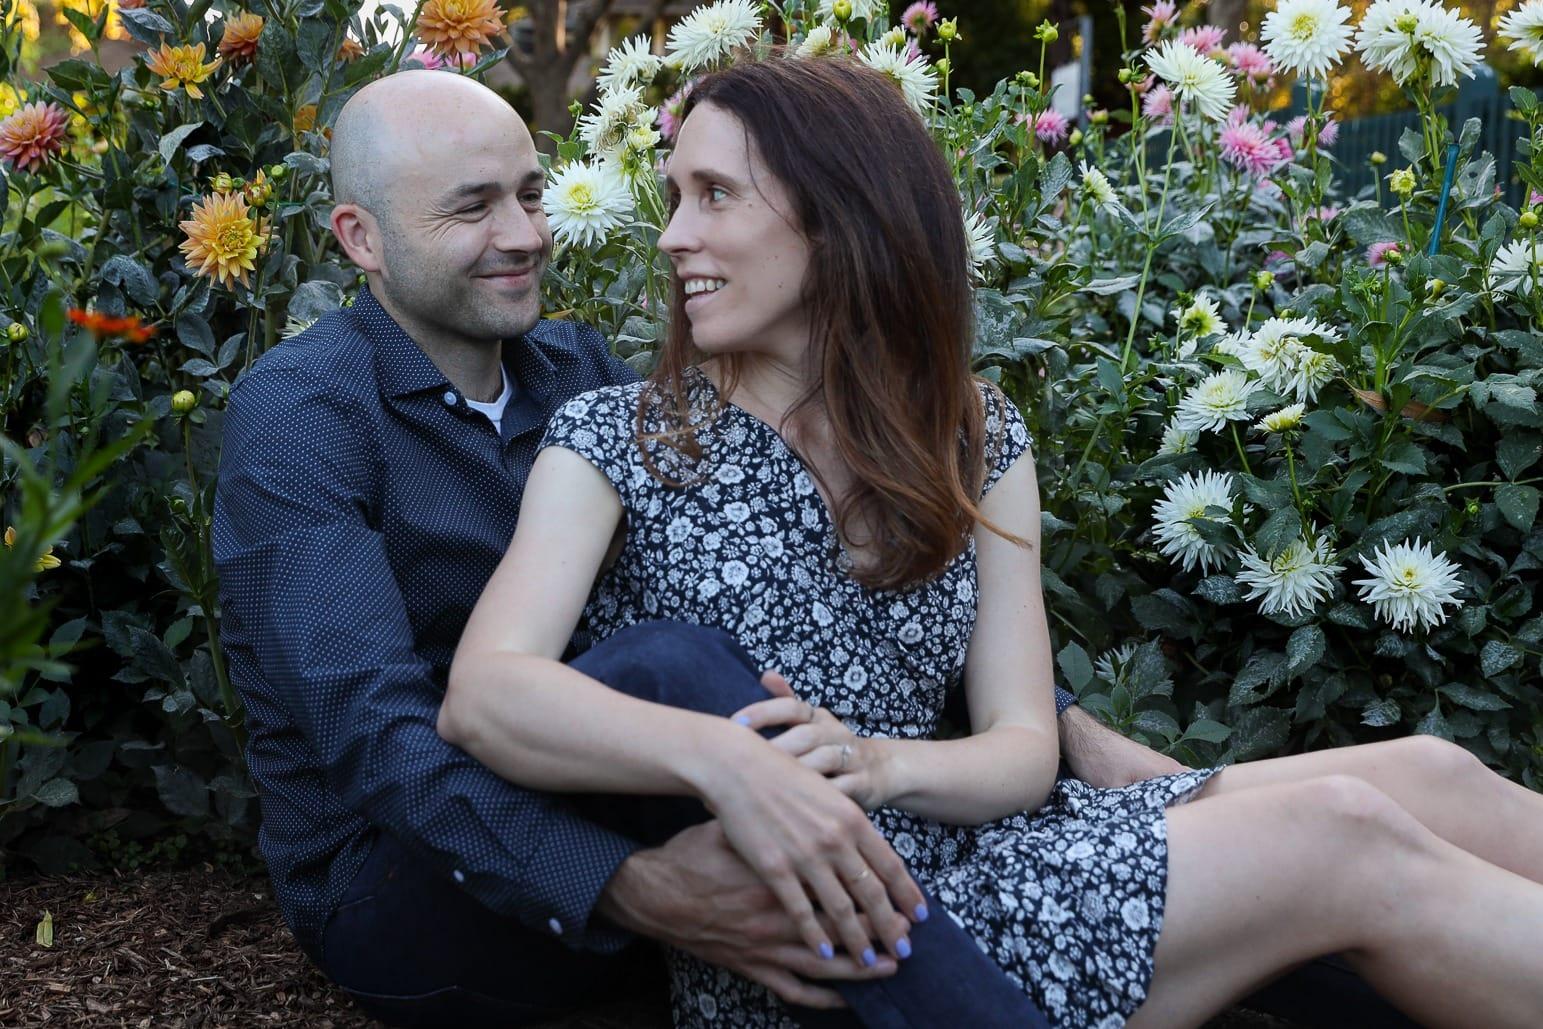 One Month Into Dating, He Got Hit By a Car — and She Stayed